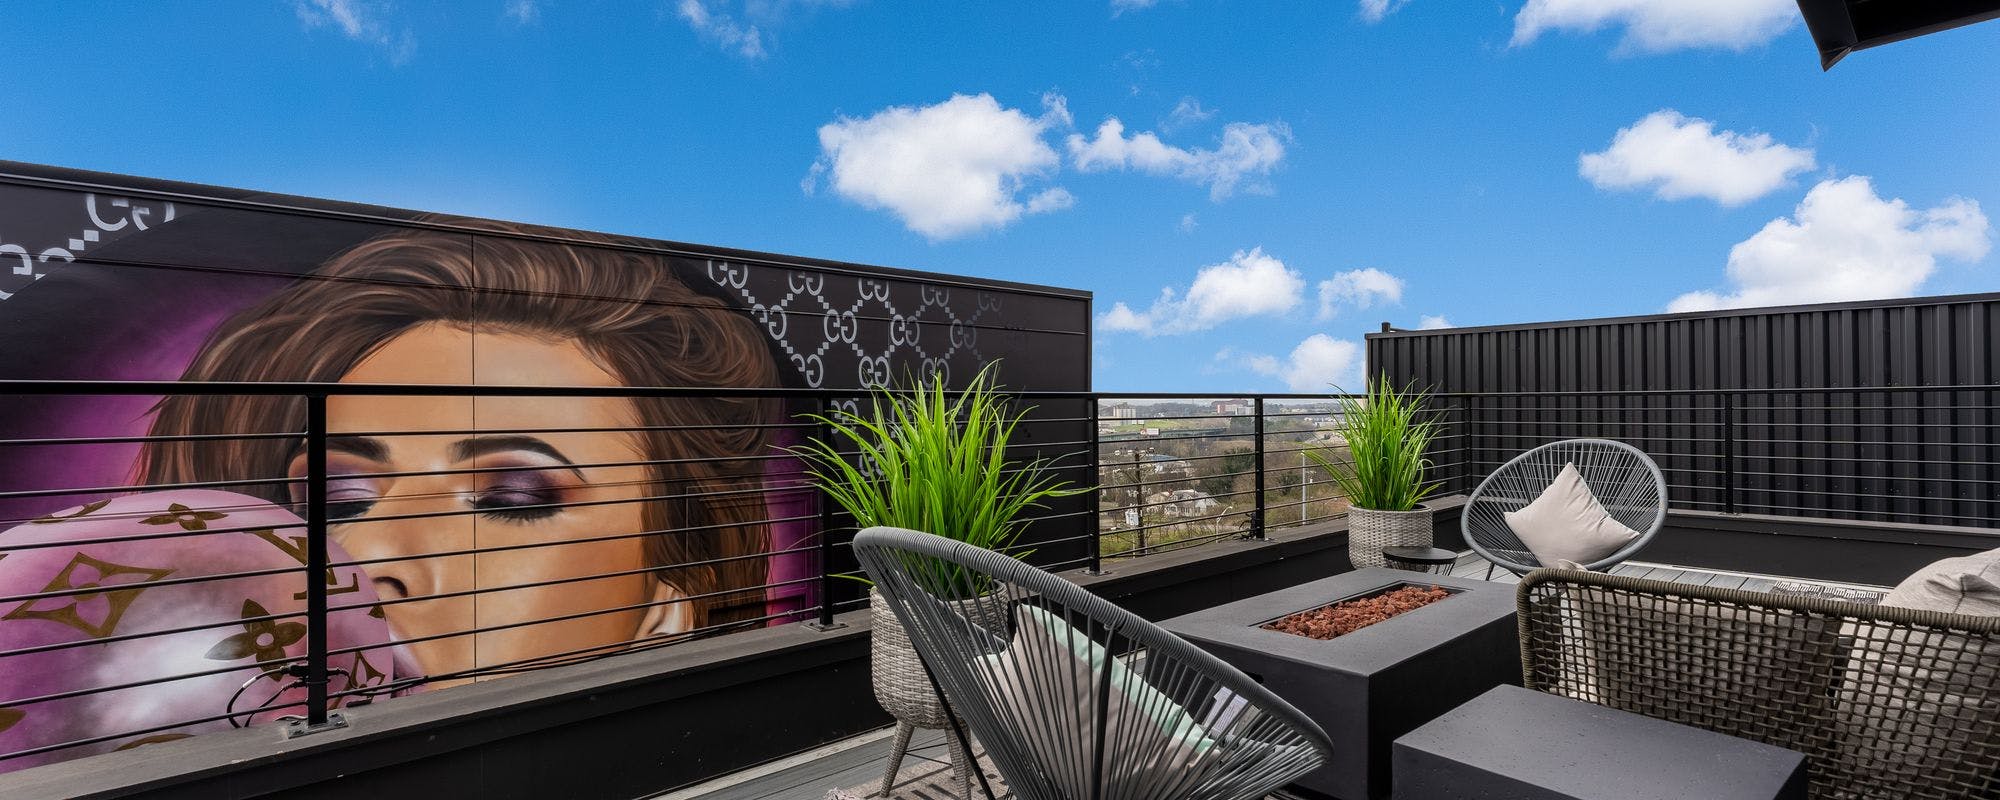 Outdoor living space overlooking mural at a Nashville vacation rental.